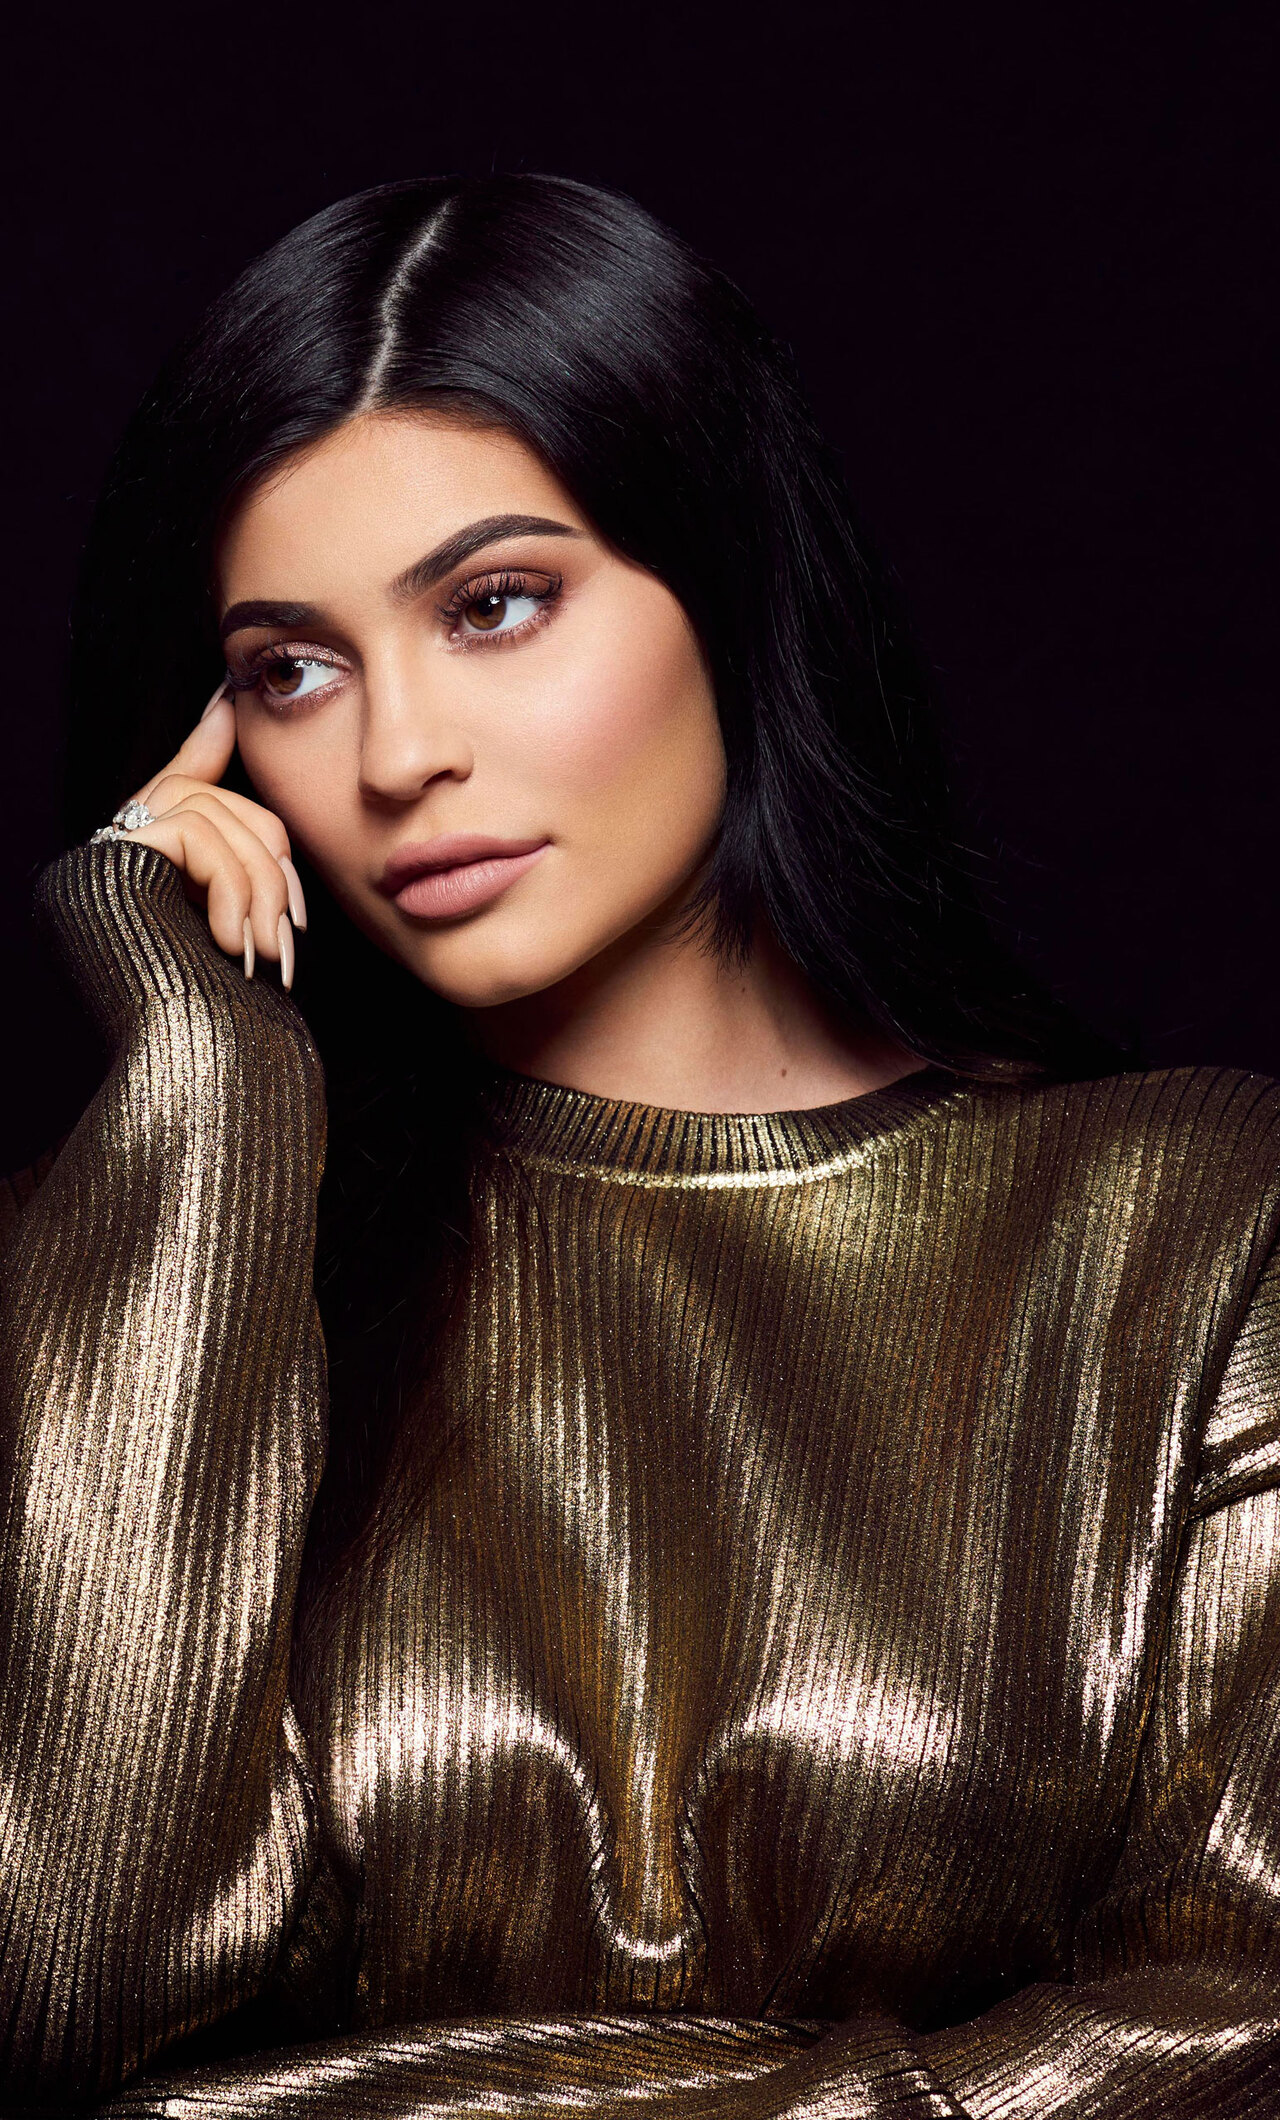 1280x2120 Kylie Jenner 4k 2018 iPhone 6+ ,HD 4k Wallpapers,Images ...